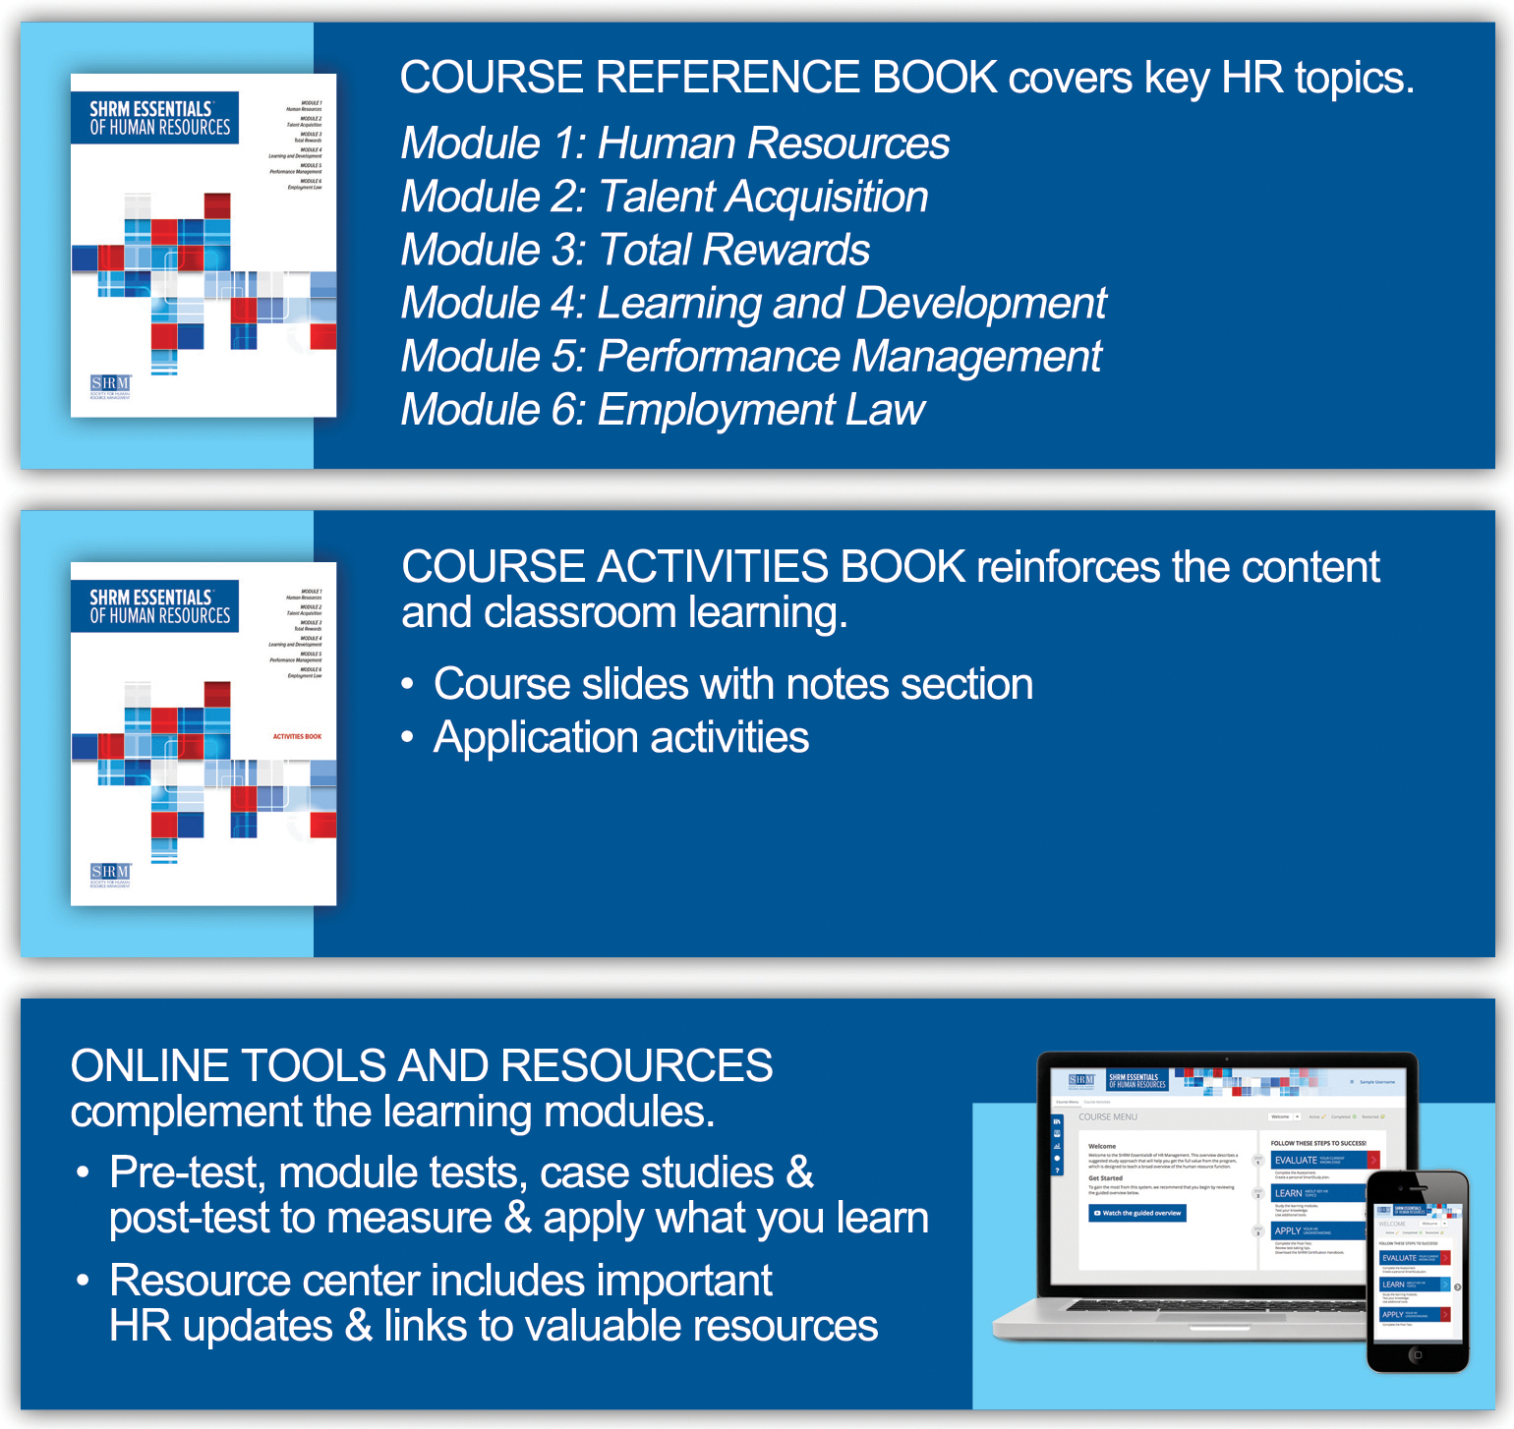 Course Reference Book. Covers key HR topics. | Module 1: Human Resources | Module 2: Talent Acquisition | Module 3: Total Rewards | Module 4: Learning and Development | Module 5: Performance Management | Module 6: Employment Law | Course Activities Book. Reinforces the content and classroom learning. | Course slides with notes section | Applications activities. | Online tools and resources | complement the learning modules. | Pre-test, module tests, case studies & post-test to measure & apply what you learn | Resource center includes important HR updates & links to valuable resources